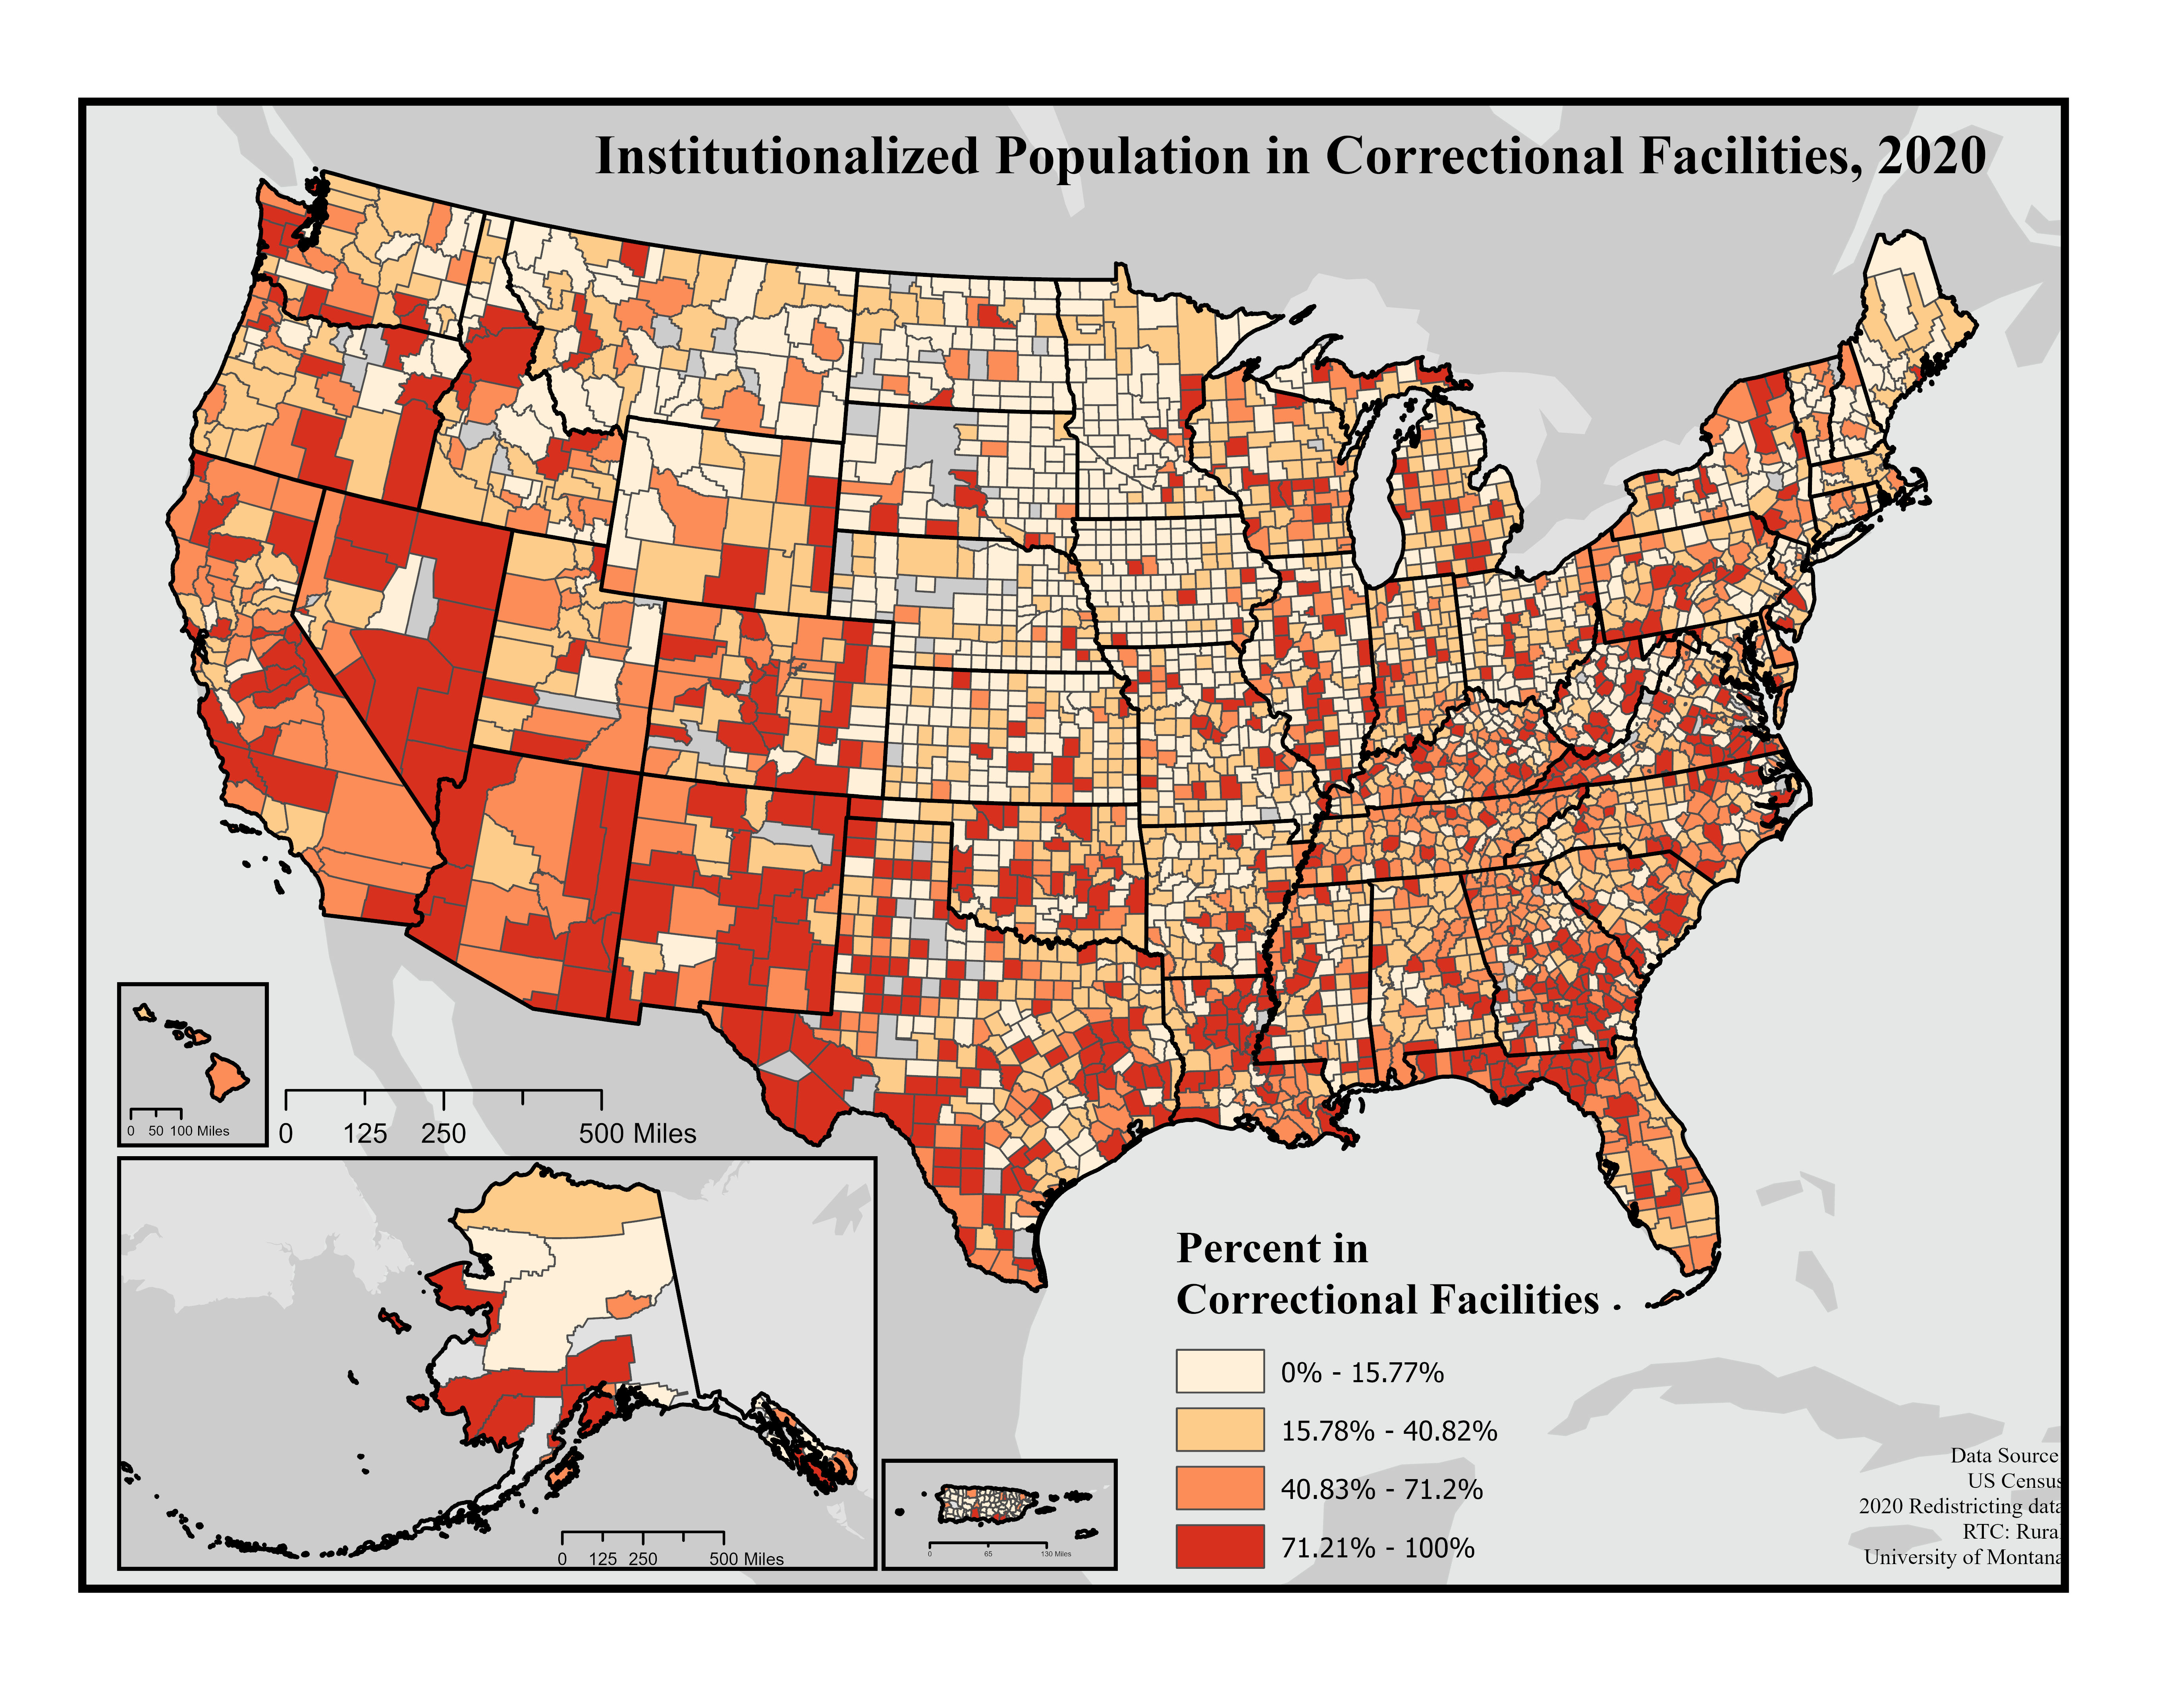 A map of United States counties showing the percentage of the institutionalized population who reside in correctional facilities (i.e. prisons and jails) in shades of light to dark orange. These data are from the US Census 2020 redistricting data. In the lightest orange are counties with 0% to 15.77% of the institutionalized population in correctional facilities. In light orange are counties with 15.78% to 40.82% in correctional facilities, in darker orange are counties with 40.83% to 71.2%. The darkest orange are counties with 71.21% to 100% residing in prisons or jails. Counties with the highest proportion of institutionalized populations in correctional facilities are scattered across the country with some clustering in the Southwest (including California) and the Florida panhandle.